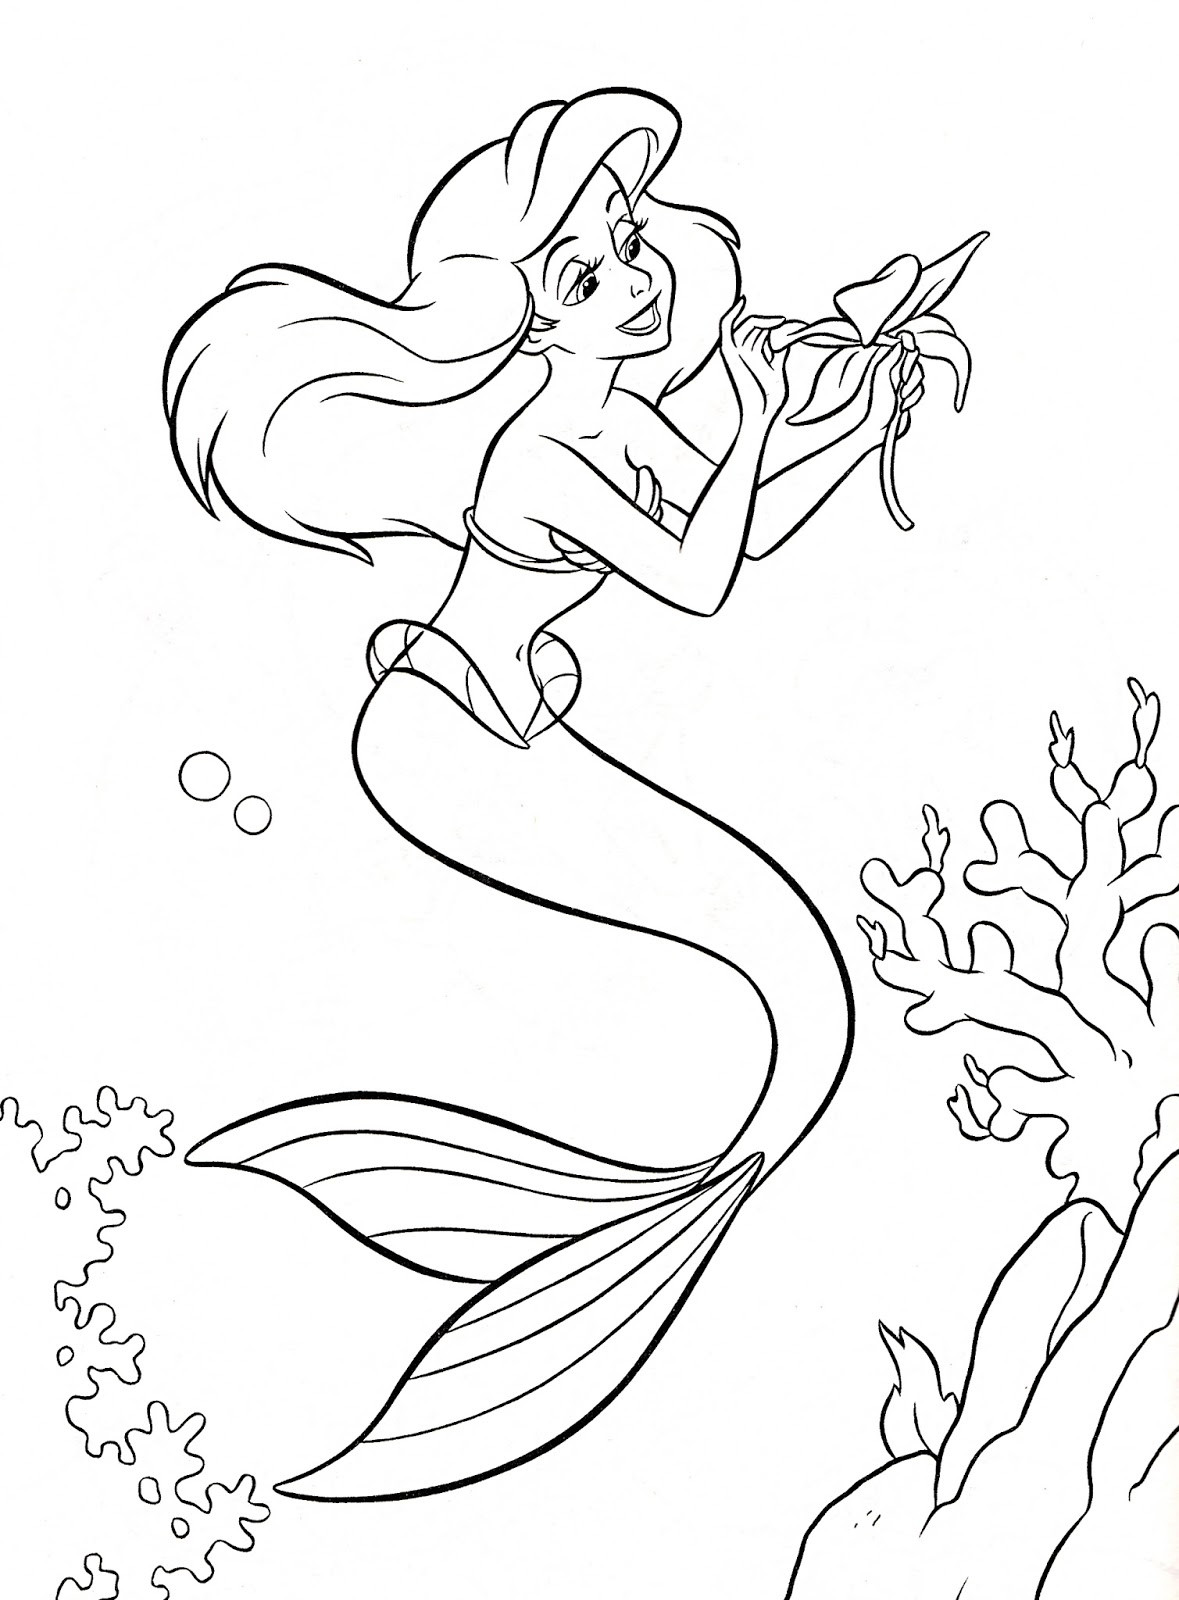 Little Mermaid Printable Coloring Pages
 DISNEY COLORING PAGES